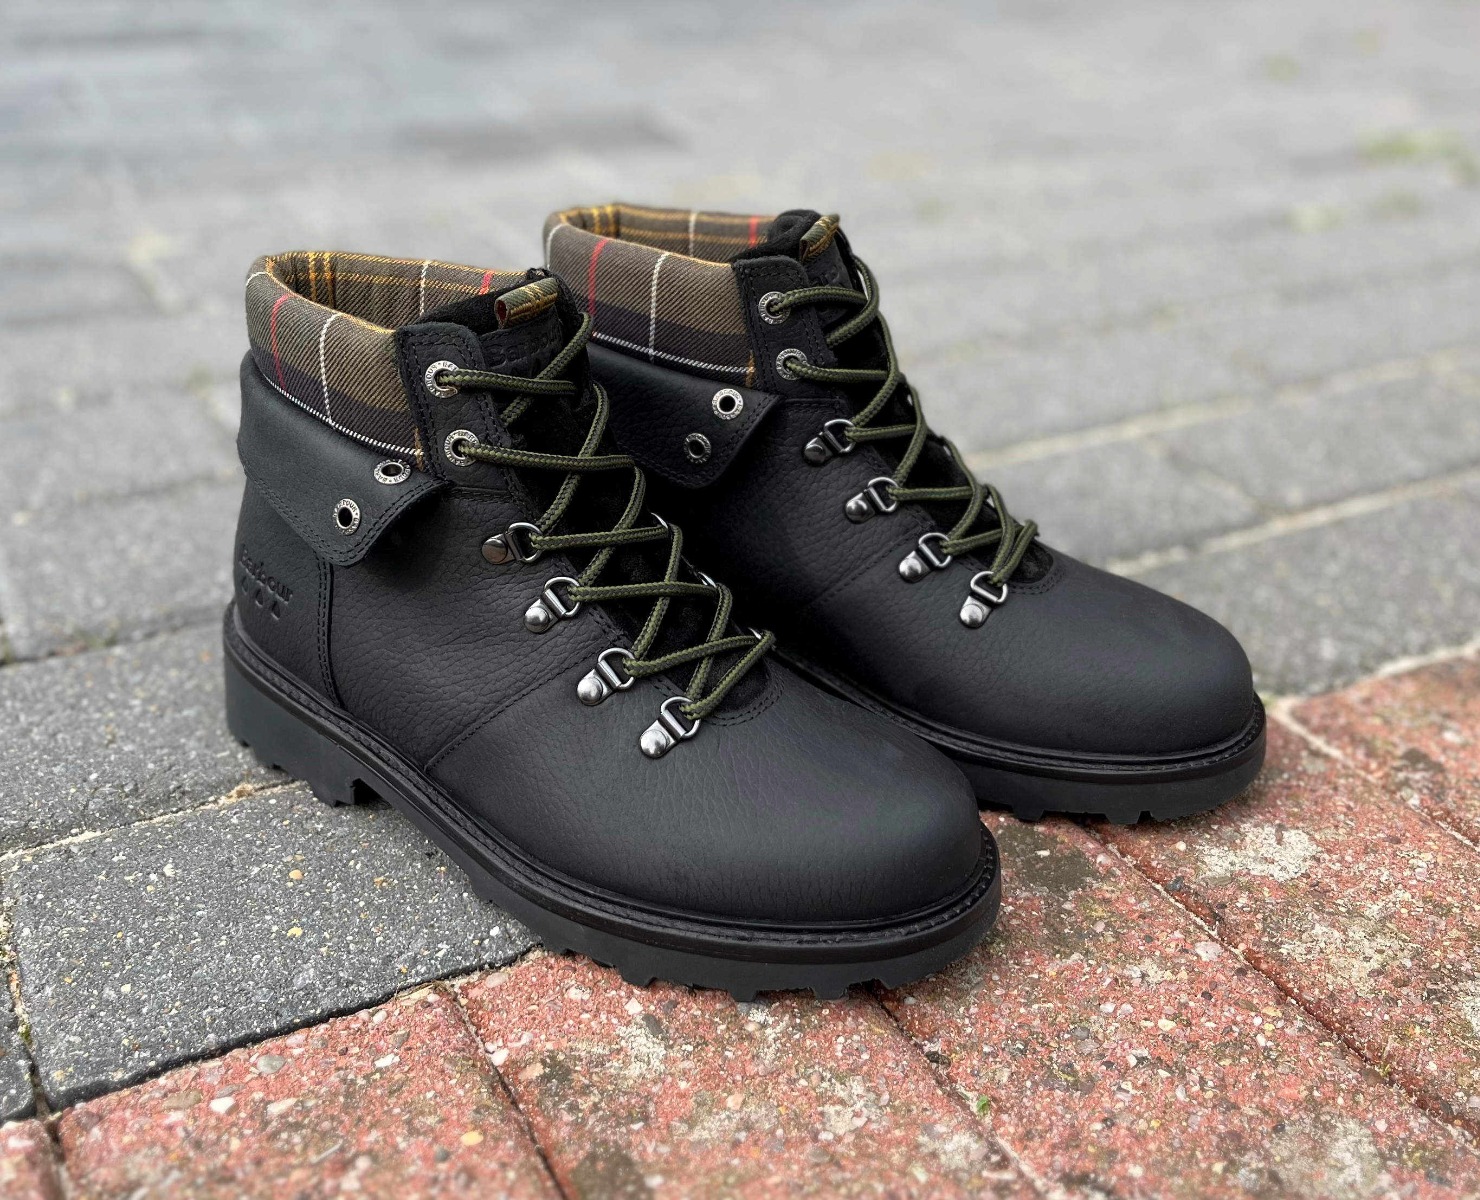 Barbour Ladies Black Leather Rubber Sole Hiking Boots